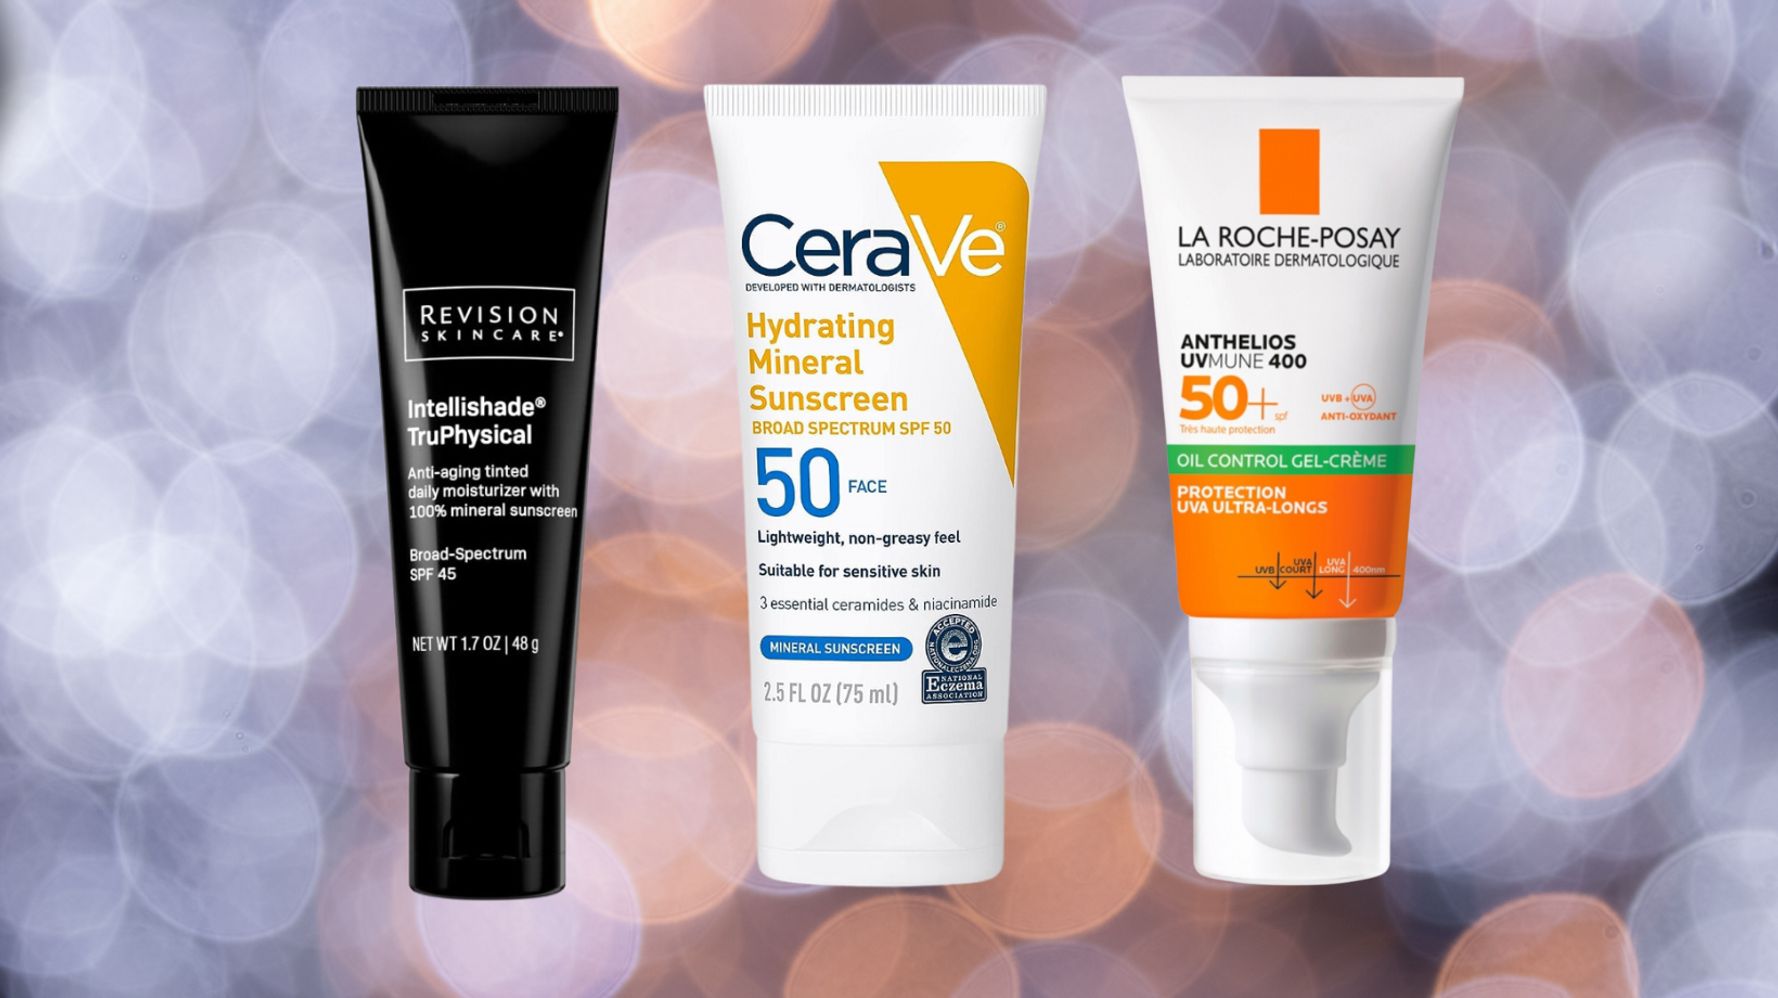 Sunscreen: Here's an affordable and skin loving SPF50.